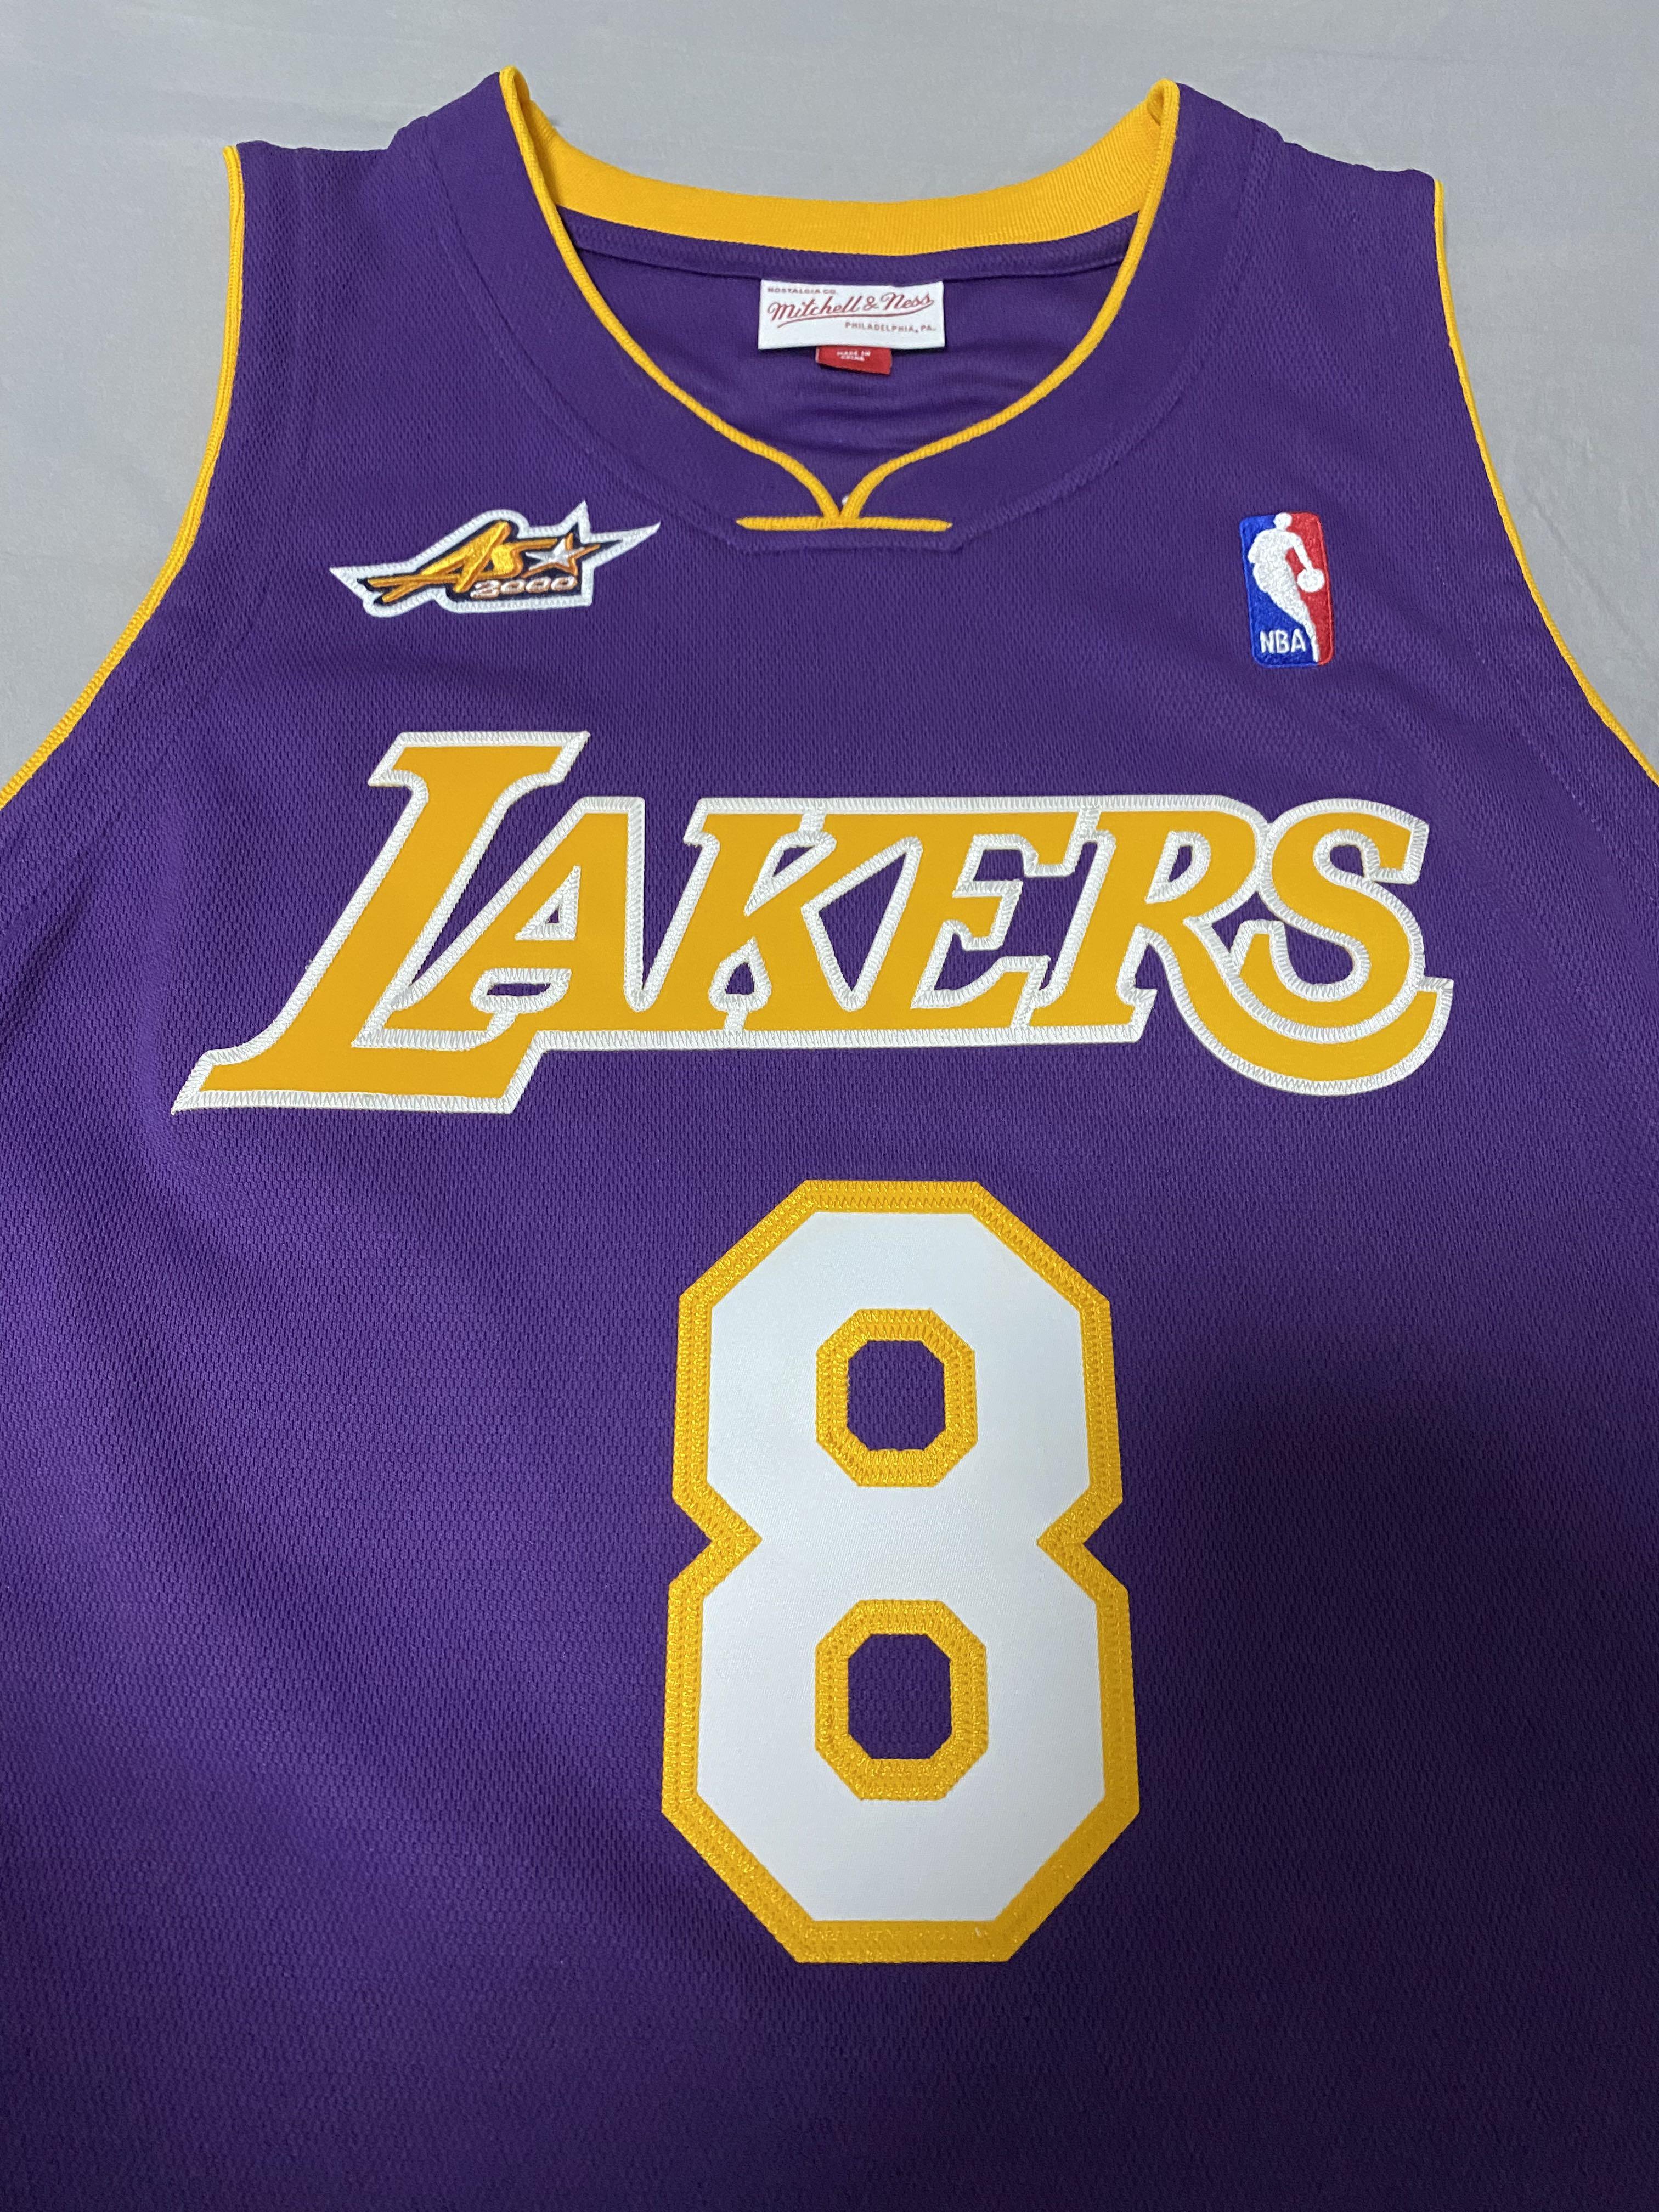 Men's Los Angeles Lakers Kobe Bryant Mitchell & Ness Purple 2000 NBA  All-Star Game Hardwood Classics Authentic Jersey